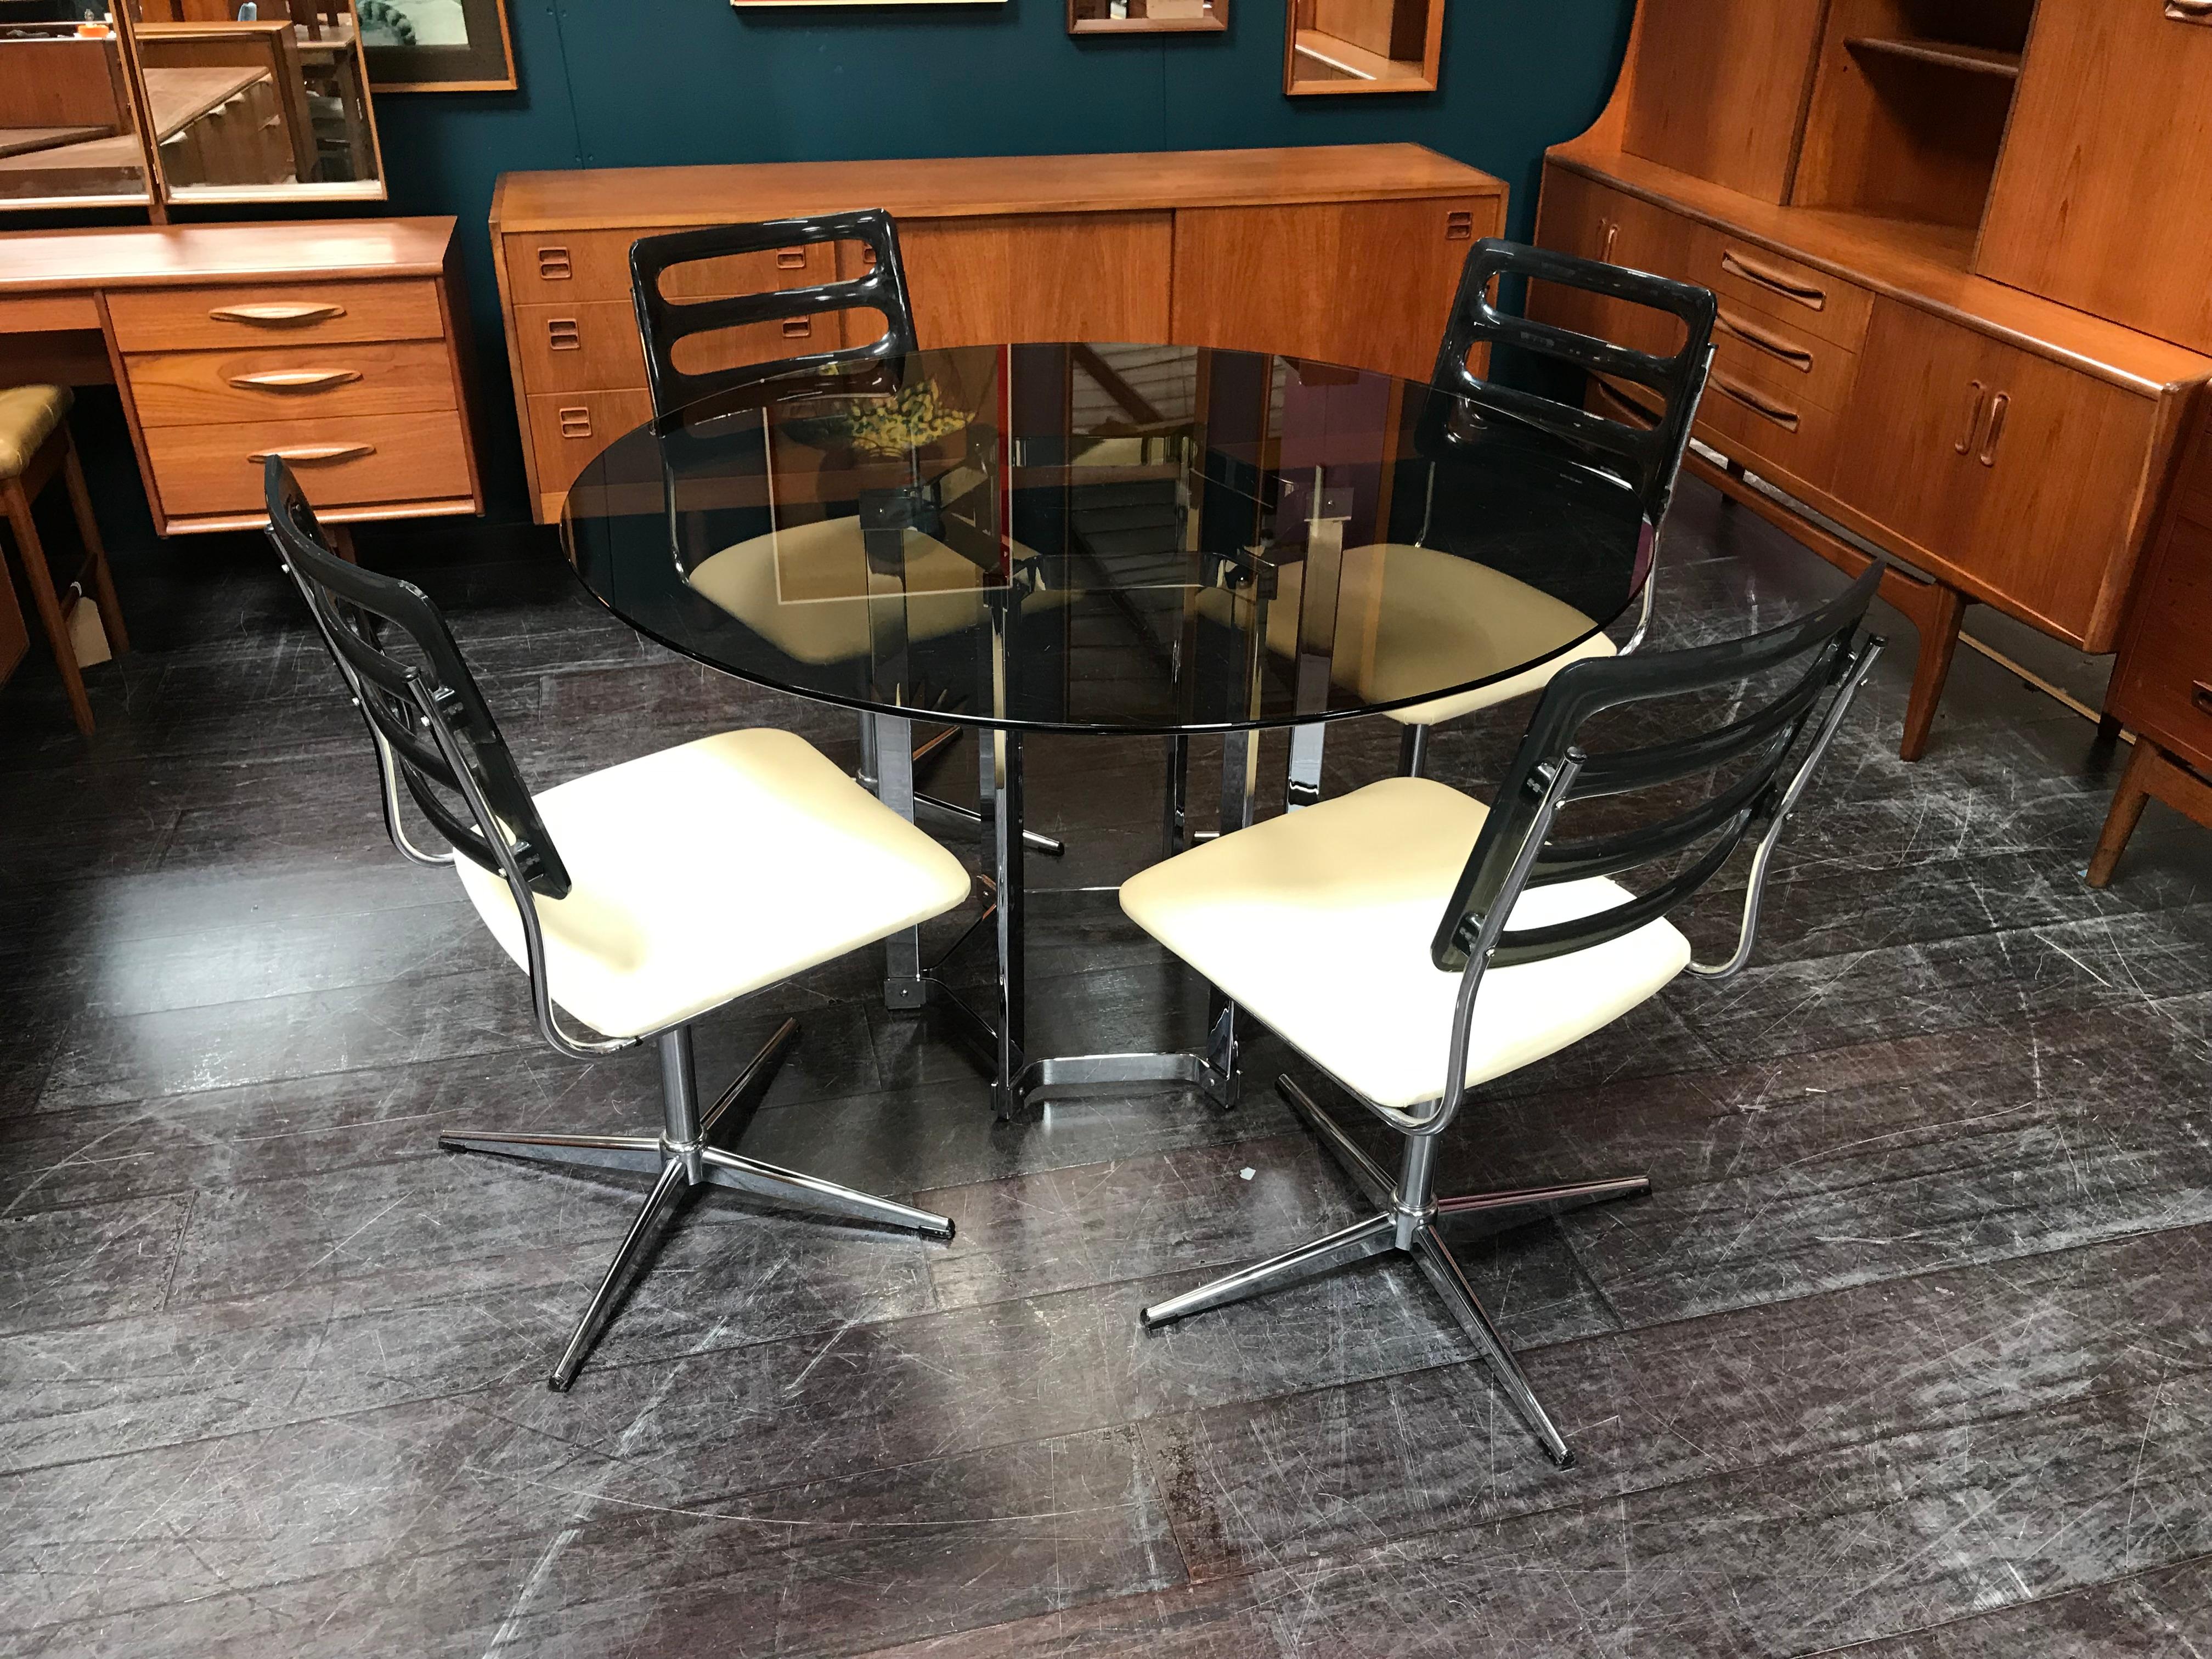 Mid-Century Modern Mid Century Chrome & Glass Table by Richard Young for Merrow with 4 Chairs For Sale